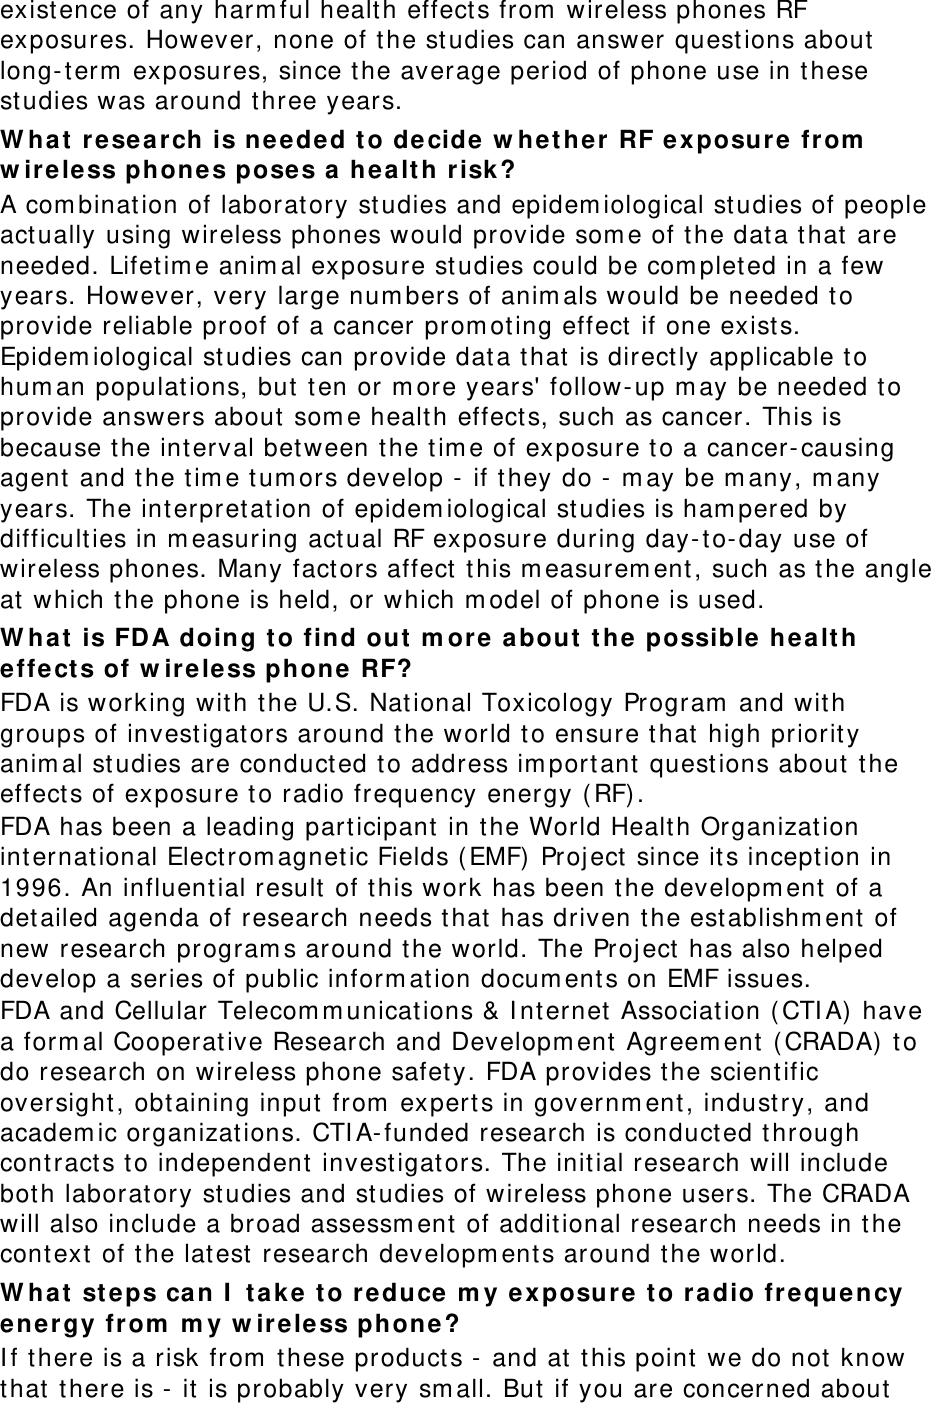 exist ence of any harm ful healt h effect s from  wireless phones RF exposures. However, none of the studies can answer quest ions about  long- t erm  exposures, since the average period of phone use in t hese studies was around t hree years. W ha t  re sear ch is neede d t o de cide w het he r RF exposure fr om  w ire less phone s pose s a  healt h risk? A com binat ion of laborat ory st udies and epidem iological st udies of people act ually using wireless phones would provide som e of the data t hat  are needed. Lifetim e anim al exposure studies could be com pleted in a few years. However, very large num bers of anim als would be needed t o provide reliable proof of a cancer prom oting effect  if one exist s. Epidem iological studies can provide dat a that is direct ly applicable to hum an populat ions, but  t en or m ore years&apos; follow- up m ay be needed t o provide answers about  som e health effect s, such as cancer. This is because t he int erval between the t im e of exposure t o a cancer-causing agent and the t im e tum ors develop -  if t hey do -  m ay be m any, m any years. The int erpret ation of epidem iological studies is ham pered by difficulties in m easuring act ual RF exposure during day- to- day use of wireless phones. Many factors affect this m easurem ent , such as t he angle at which t he phone is held, or which m odel of phone is used. W ha t  is FDA doing to find out  m or e about  t he possible healt h effect s of w ir eless phone RF? FDA is working wit h the U.S. Nat ional Toxicology Program  and wit h groups of investigat ors around t he world t o ensure that high priority anim al st udies are conduct ed t o address im port ant quest ions about  t he effect s of exposure t o radio frequency energy ( RF) . FDA has been a leading participant in t he World Health Organization int ernational Elect rom agnetic Fields ( EMF)  Proj ect  since it s inception in 1996. An influent ial result  of this work has been t he developm ent  of a detailed agenda of research needs that  has driven the est ablishm ent  of new research program s around t he world. The Proj ect  has also helped develop a series of public inform at ion docum ent s on EMF issues. FDA and Cellular Telecom m unicat ions &amp; I nternet Association ( CTI A)  have a form al Cooperat ive Research and Developm ent  Agreem ent ( CRADA)  t o do research on wireless phone safety. FDA provides the scientific oversight , obtaining input  from  experts in governm ent , indust ry, and academ ic organizations. CTI A- funded research is conduct ed t hrough cont ract s to independent  invest igators. The initial research will include both laboratory studies and st udies of wireless phone users. The CRADA will also include a broad assessm ent of addit ional research needs in t he cont ext  of t he latest  research developm ent s around t he world. W ha t  st eps can I  t ak e to reduce m y ex posure t o ra dio fre que ncy en ergy fr om  m y w irele ss phone ? I f t here is a risk from  t hese product s -  and at t his point  we do not know that t here is - it is probably very sm all. But  if you are concerned about  